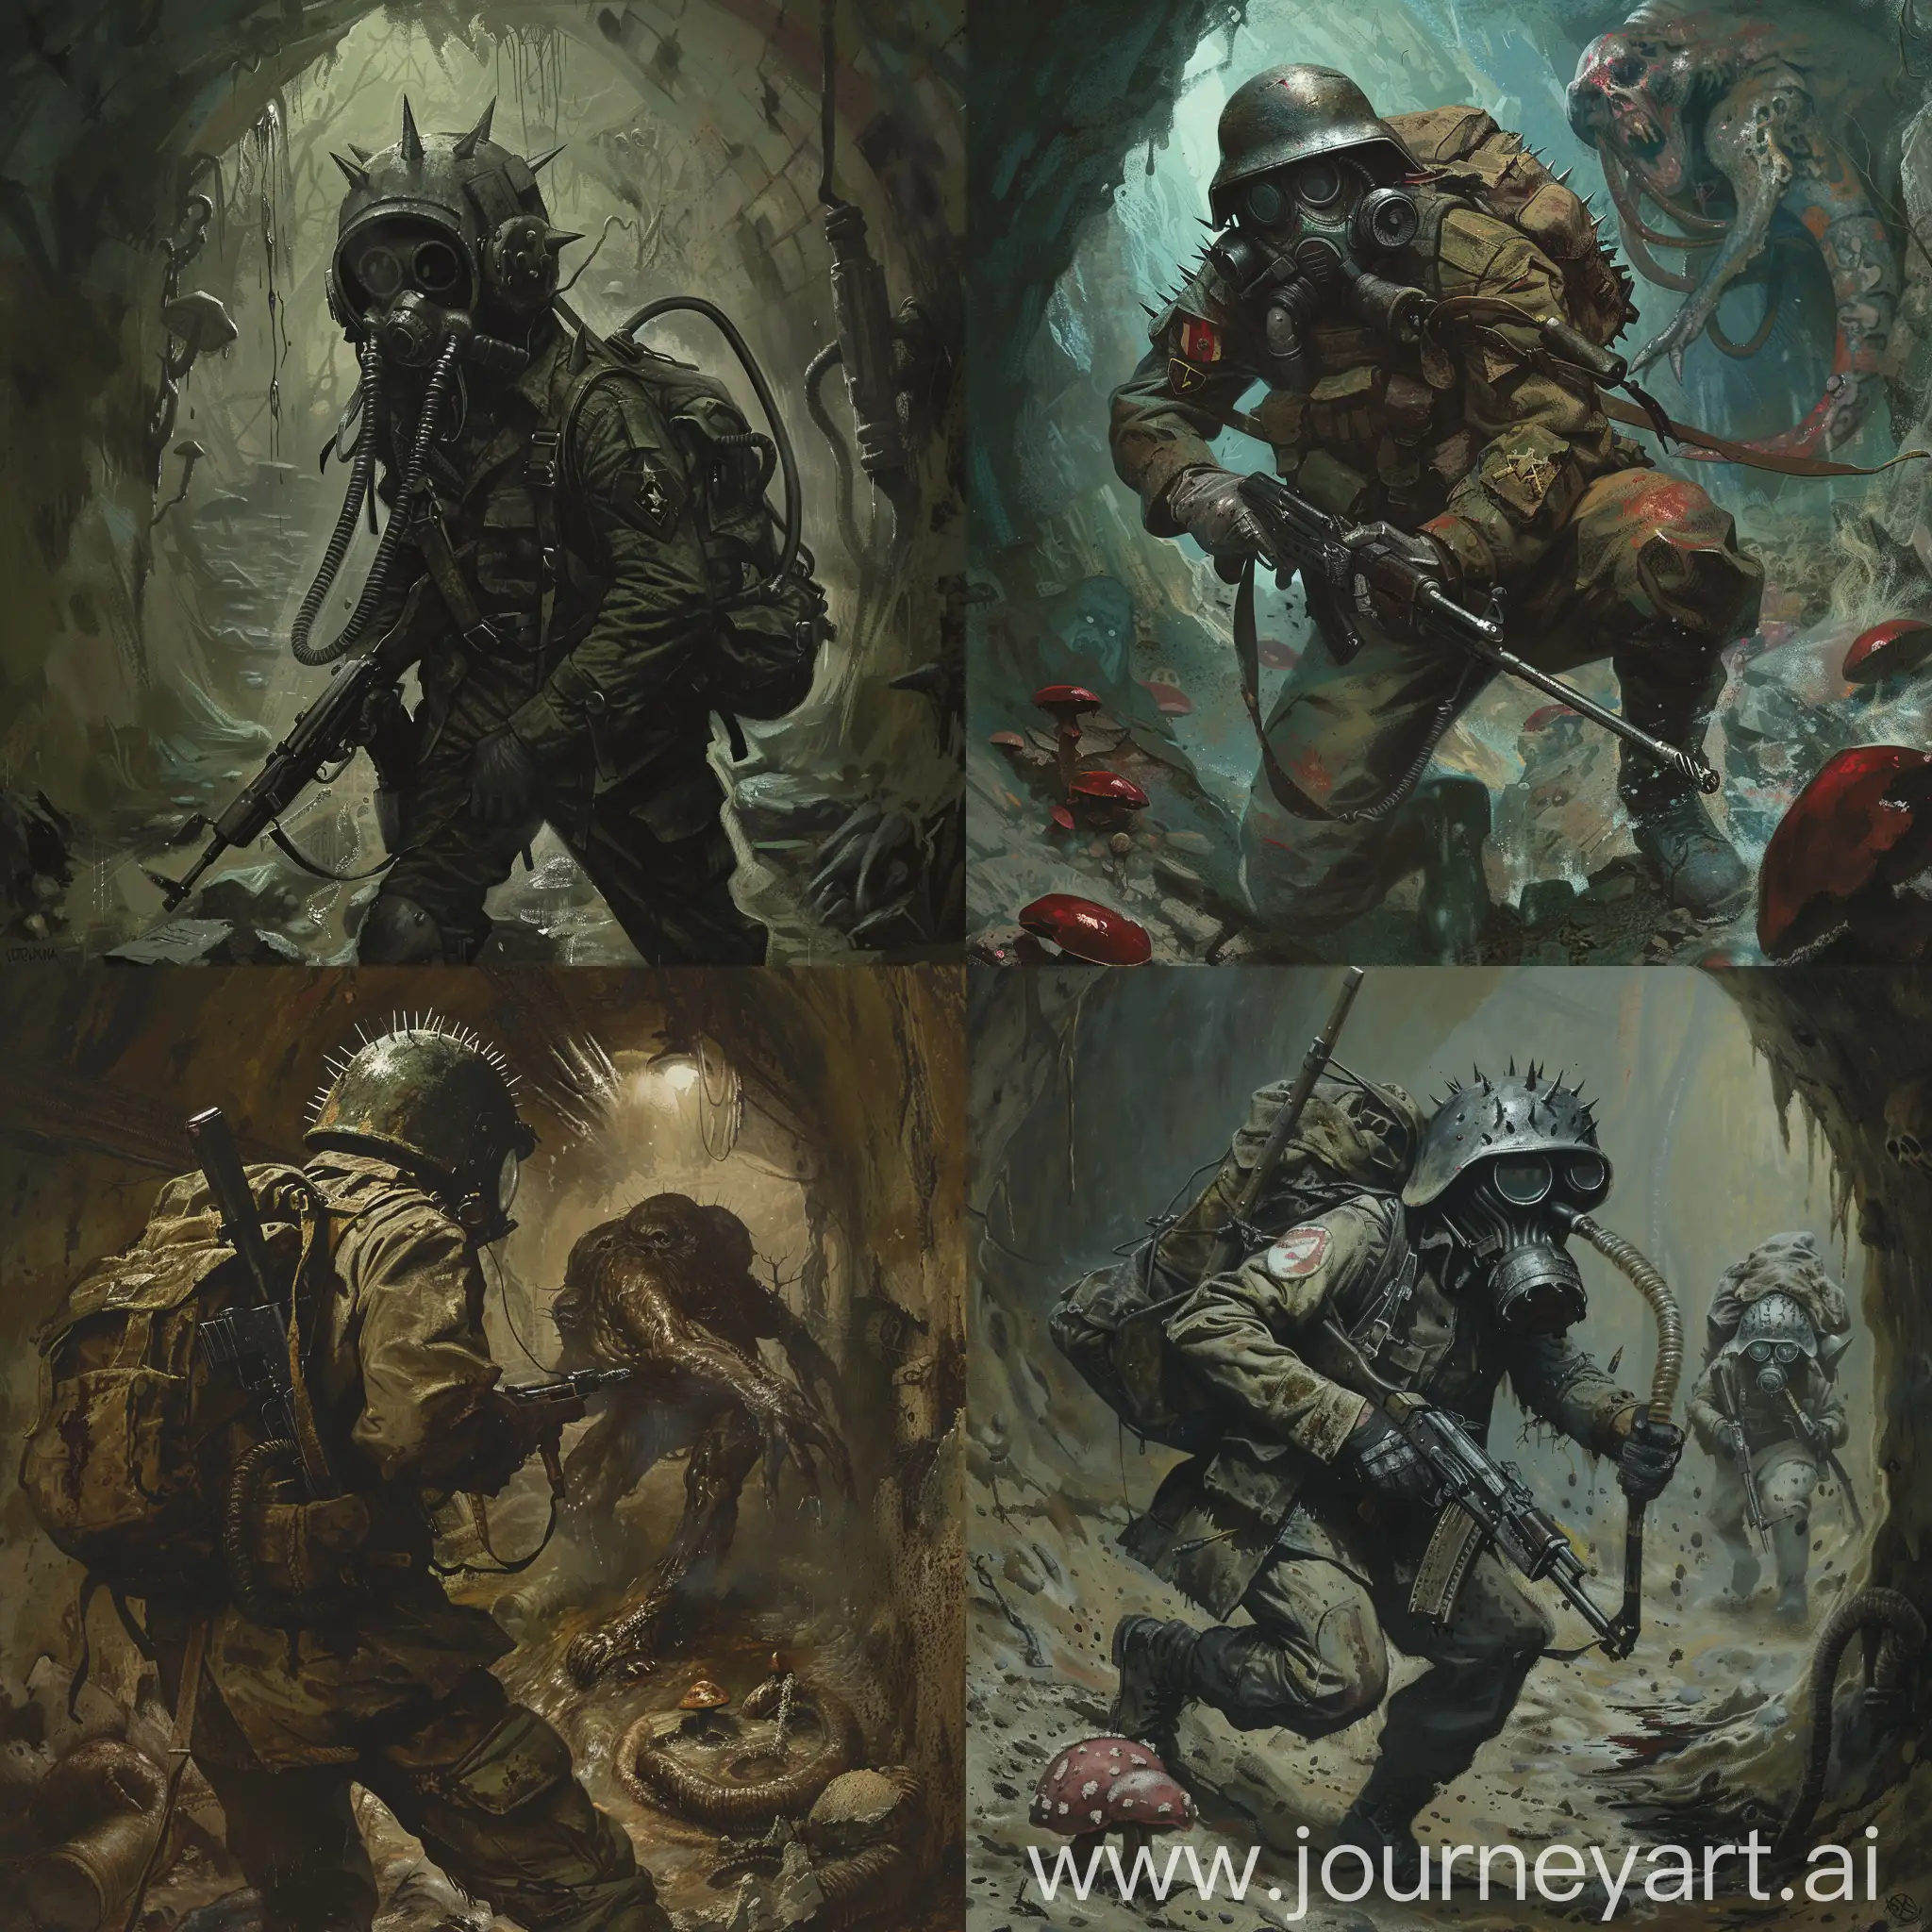 A stalker in a dirty and torn Soviet uniform, helmet with spikes on the stalker's head, a gasmask without filters with a breathing tube that is connected to the gasmask and which goes into the stalker's backpack, also wearing a bulletproof vest, holding a sniper rifle, a small backpack on his back, a stalker in the catacombs is running from a huge very big mutant worm is chasing a stalker, catacombs in slime and mushrooms, there are no light sources, darkness, the atmosphere is tense, dynamic.